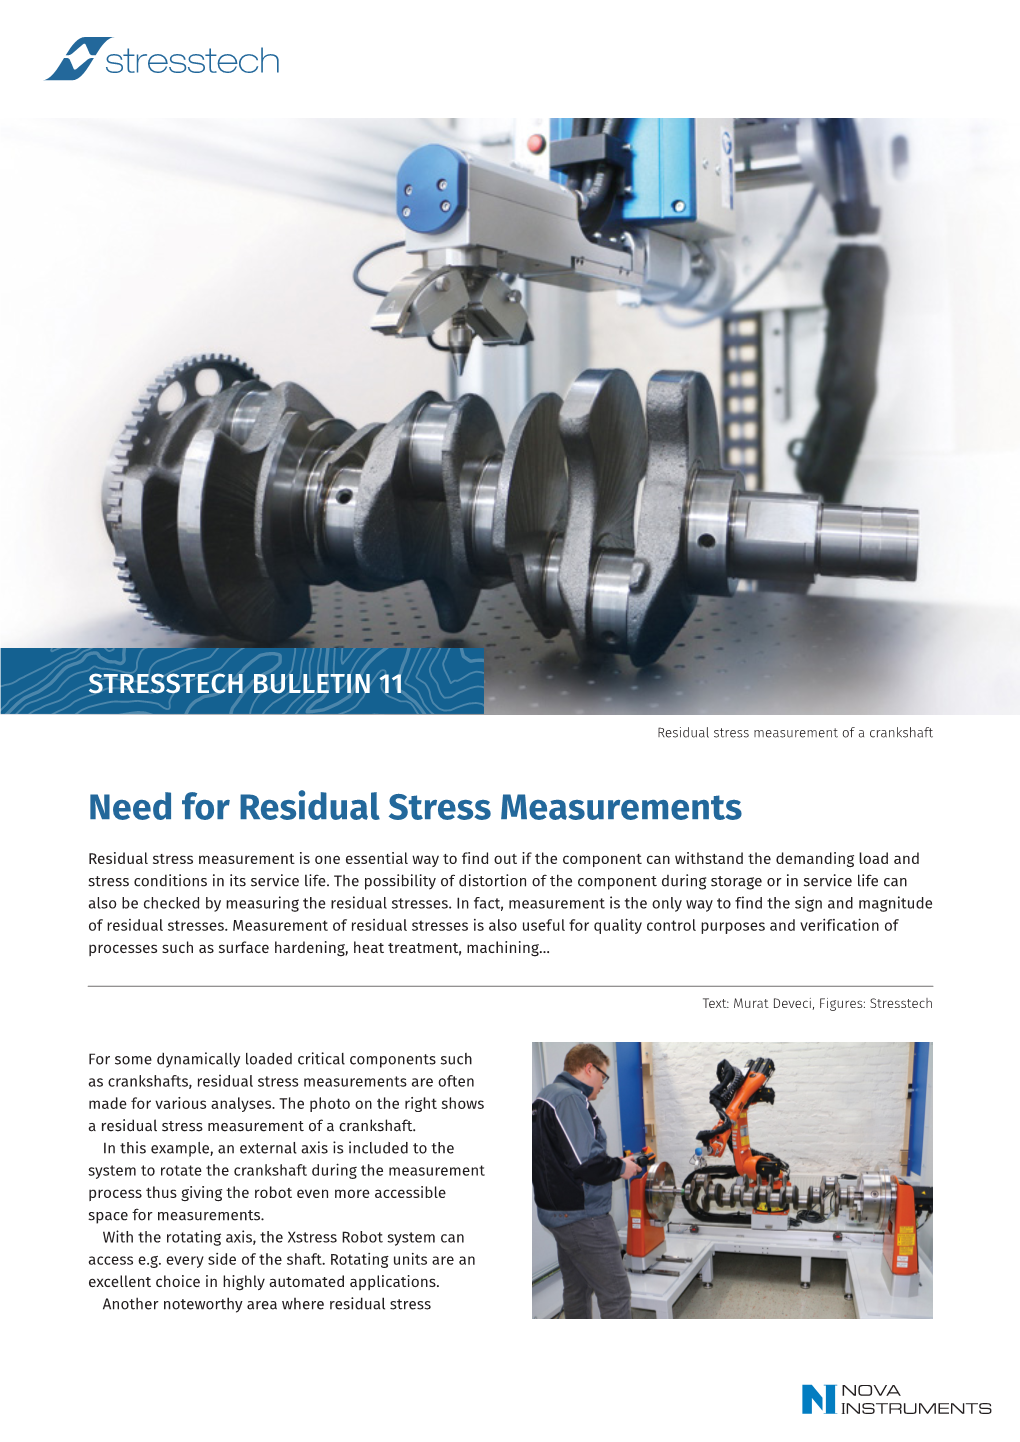 Need for Residual Stress Measurements